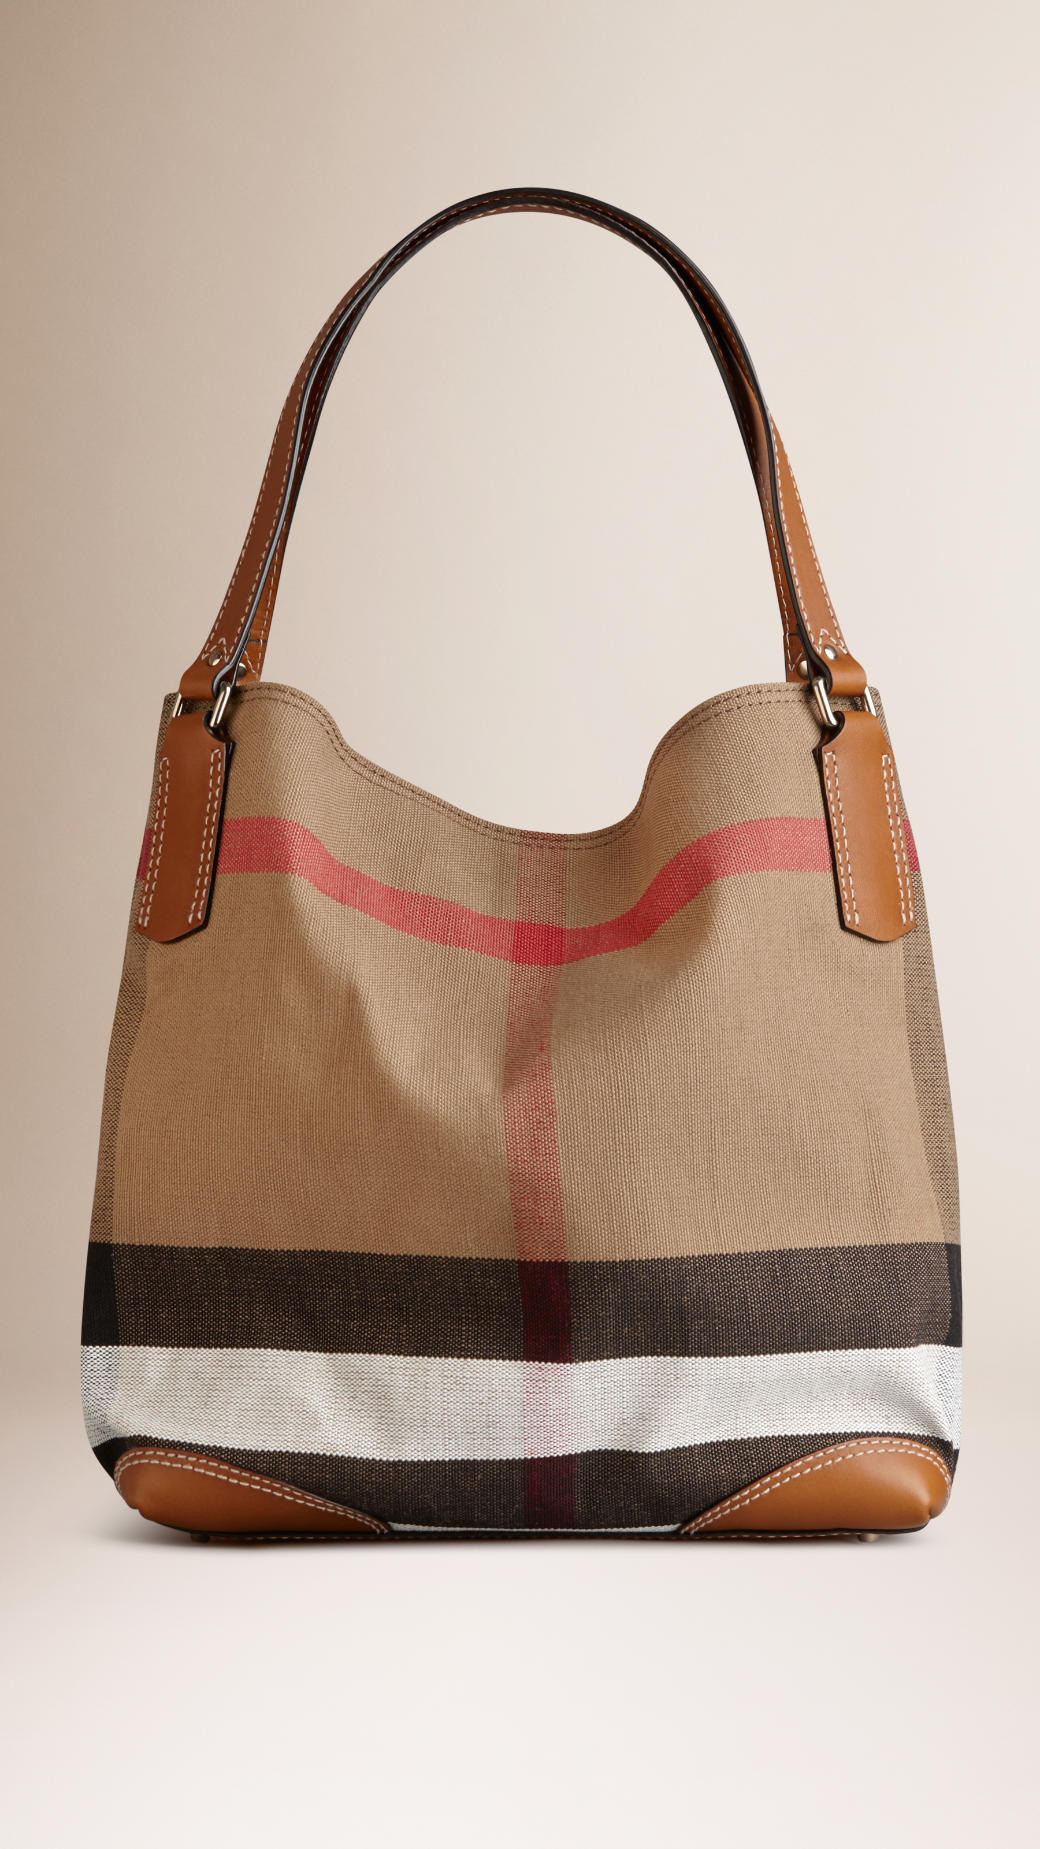 Burberry Medium Canvas Check Tote Bag in Brown (saddle brown) | Lyst